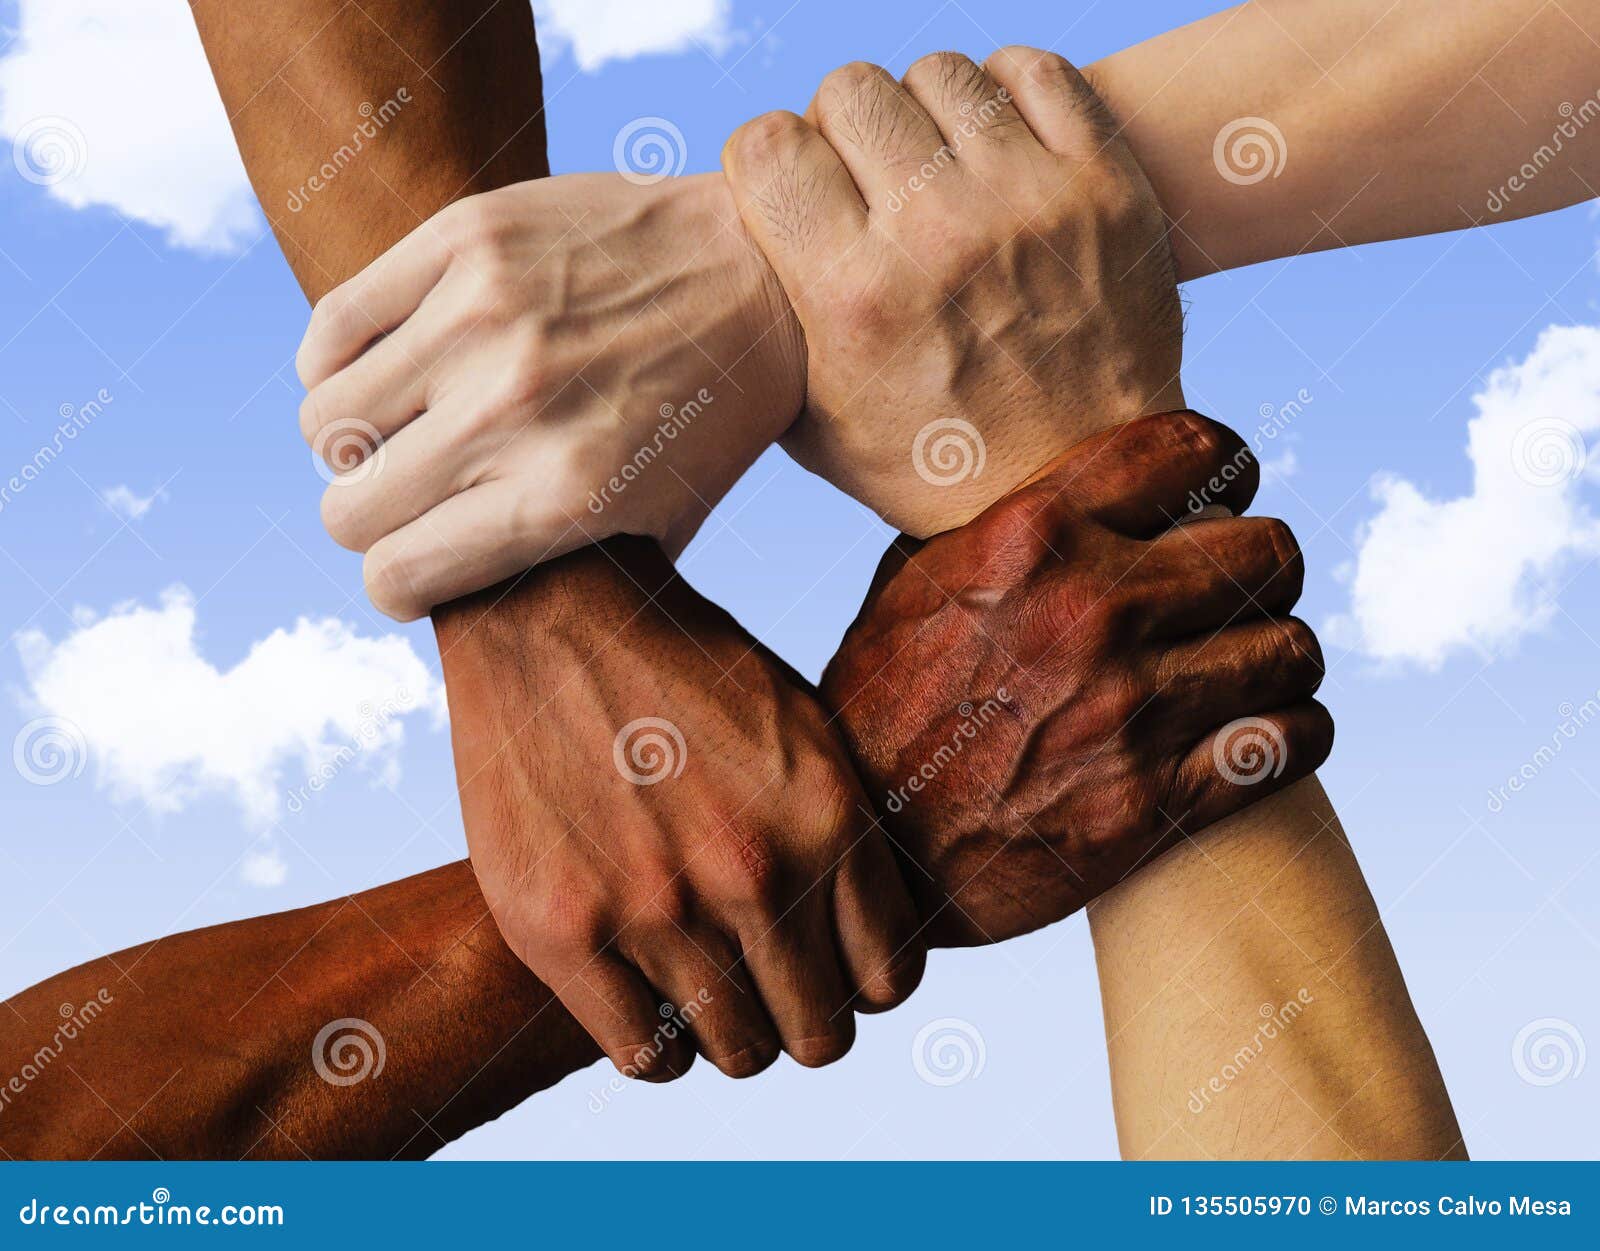 multiracial group with black african american caucasian and asian hands holding each other wrist in tolerance unity love and anti